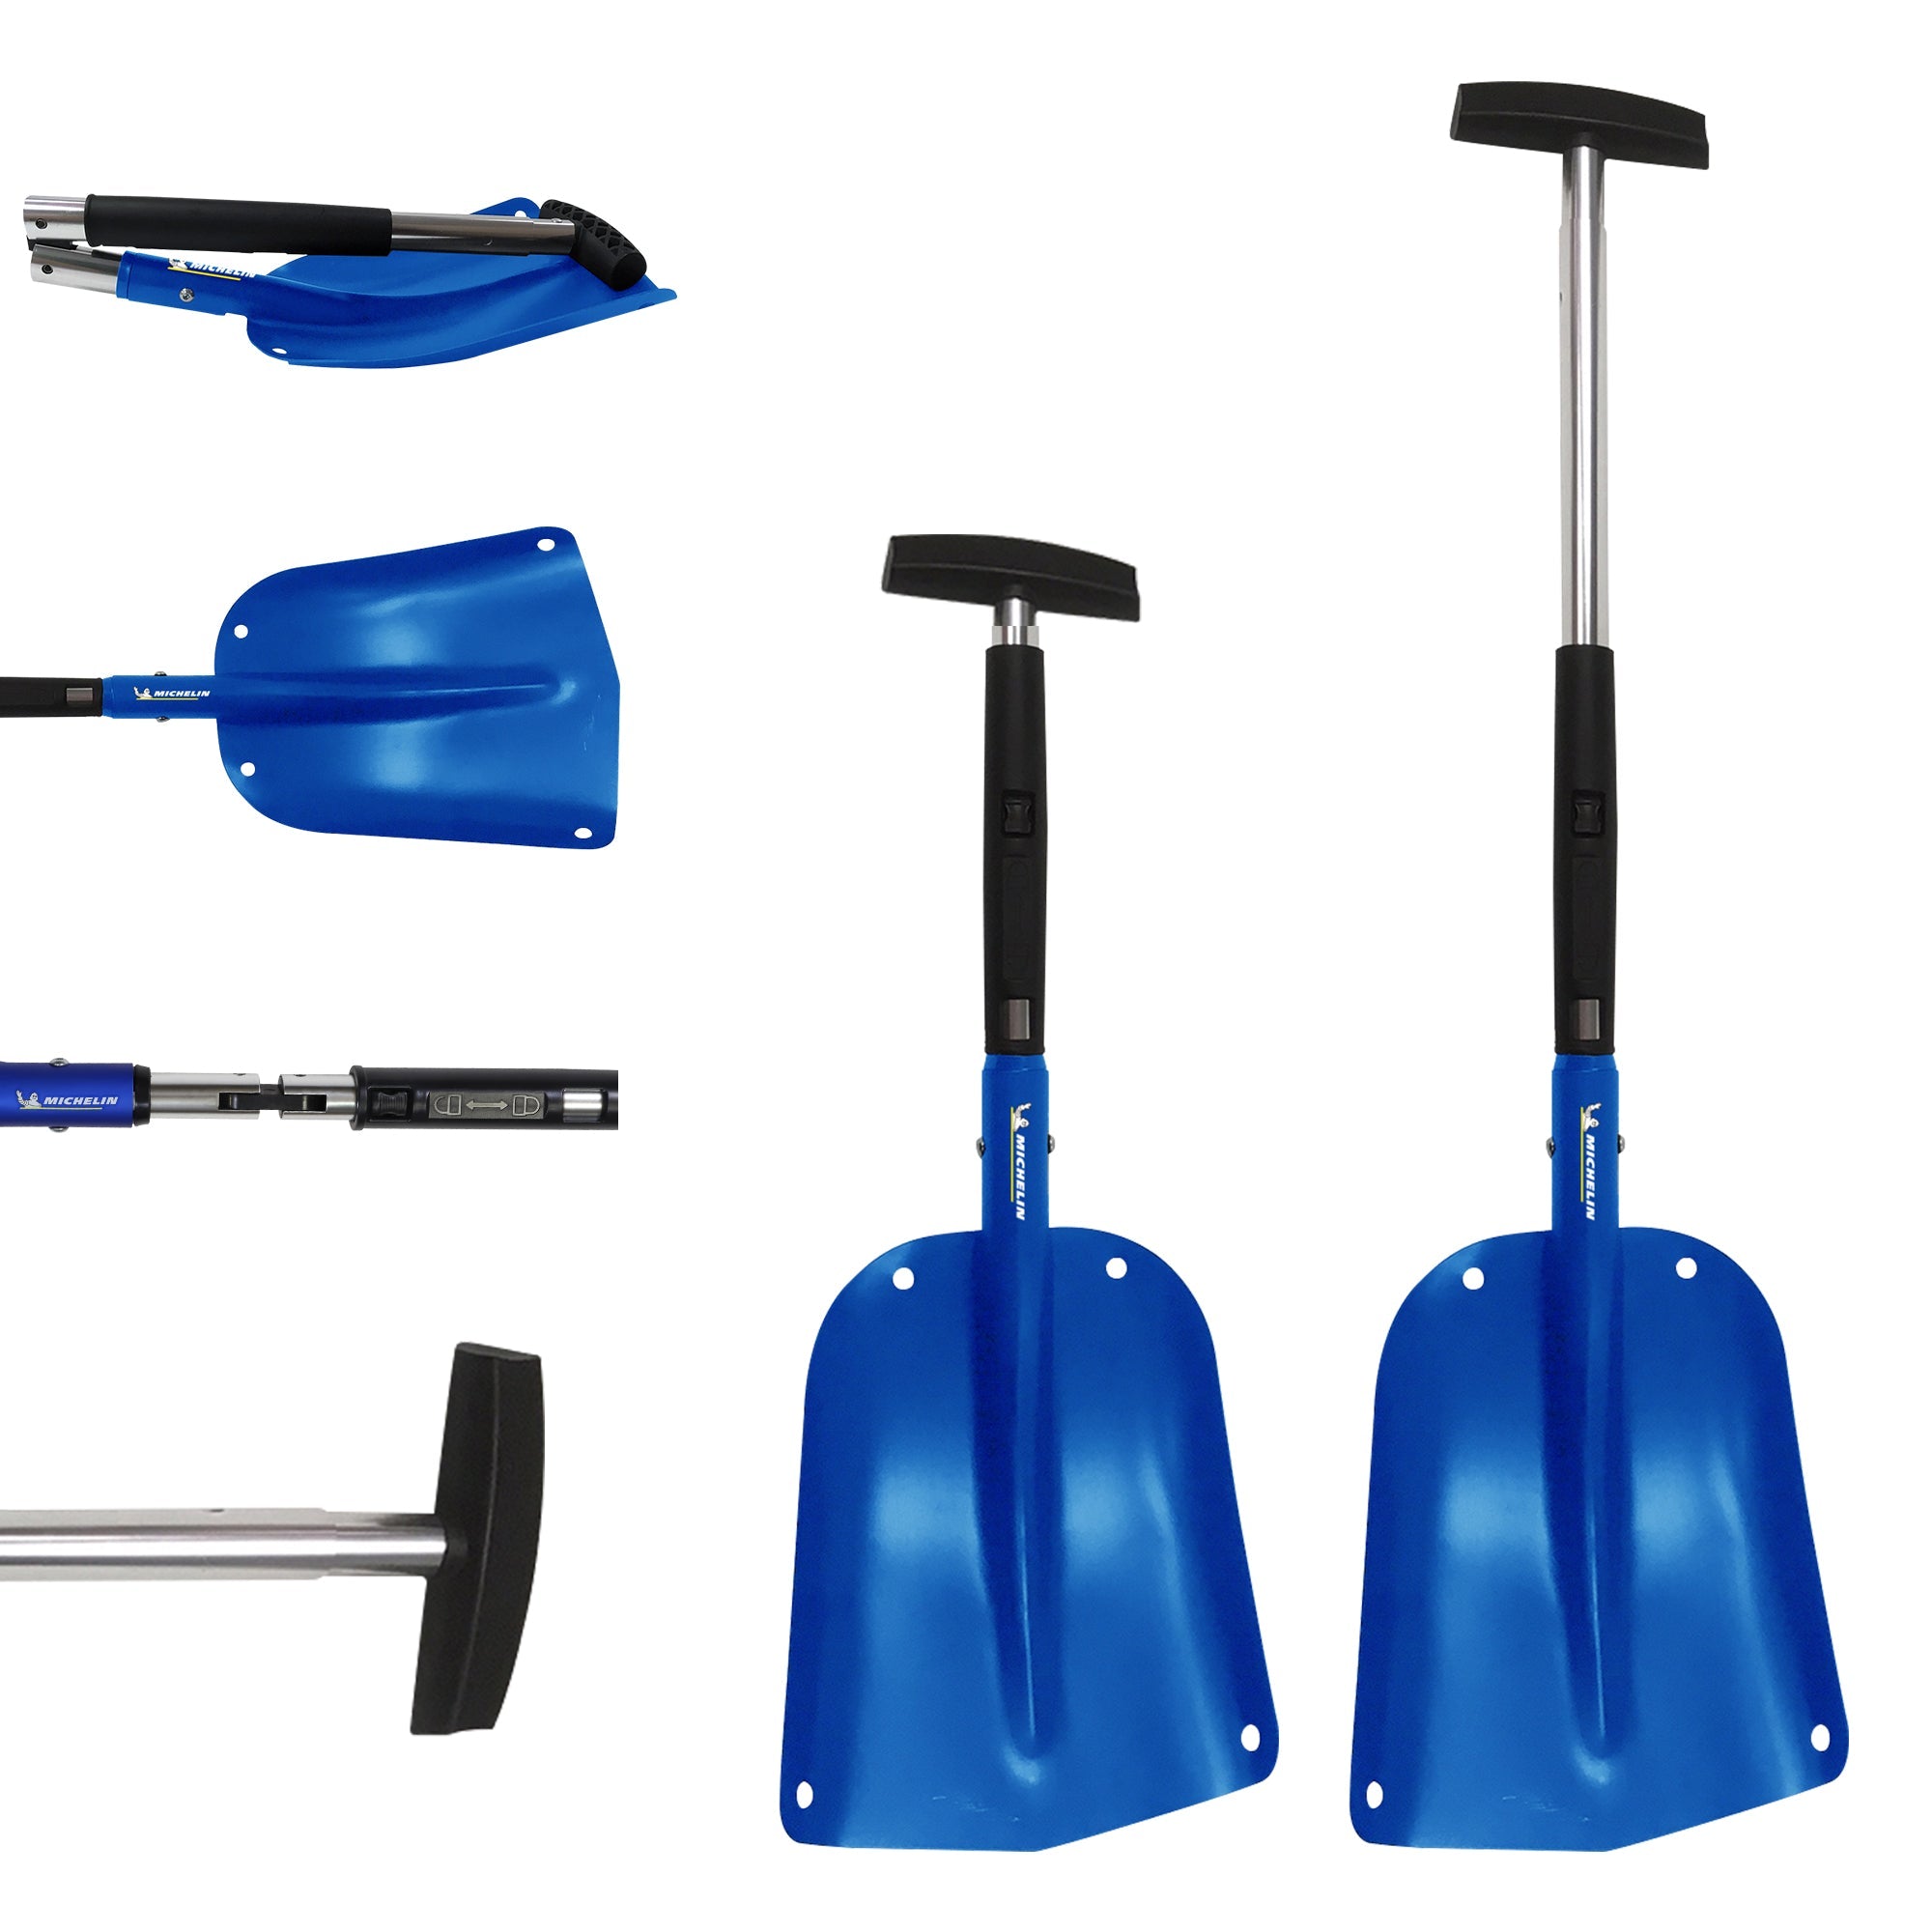 Two product shots of folding utility shovel on a white background, one with handle fully extended and one with handle not extended. Four inset closeups on the left show, from the top: the shovel folded for storage; the large shovel pan; the handle lock; and the non-slip hand hold